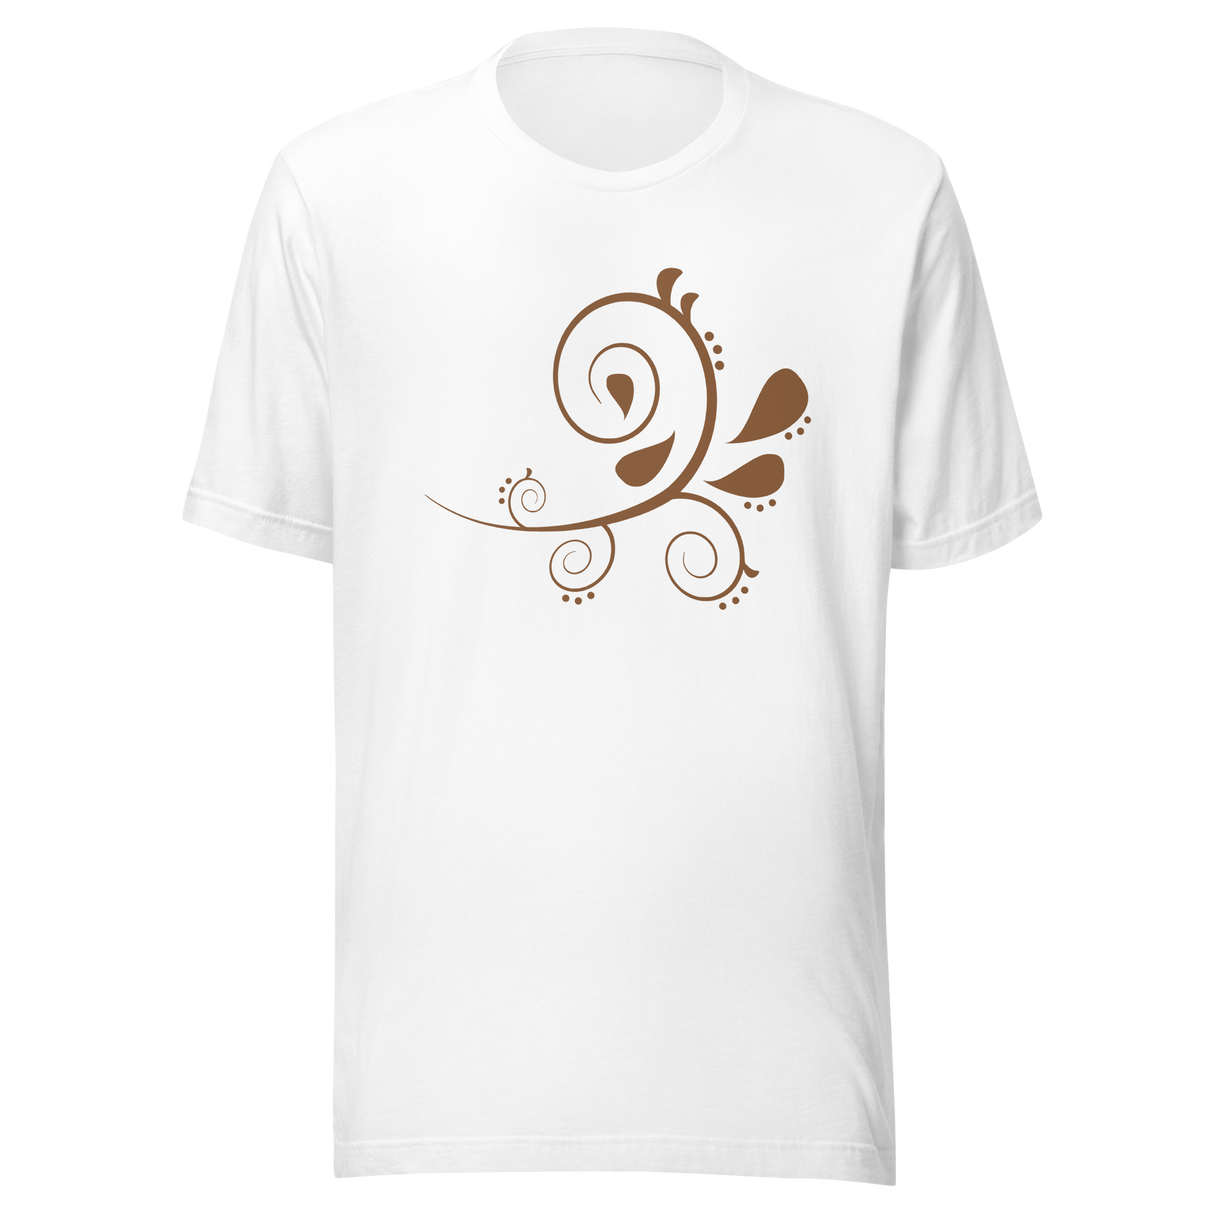 floral-illustrated-art-floral-tee-illustrated-t-shirt-flower-tee-floral-t-shirt-ladies-tee#color_white